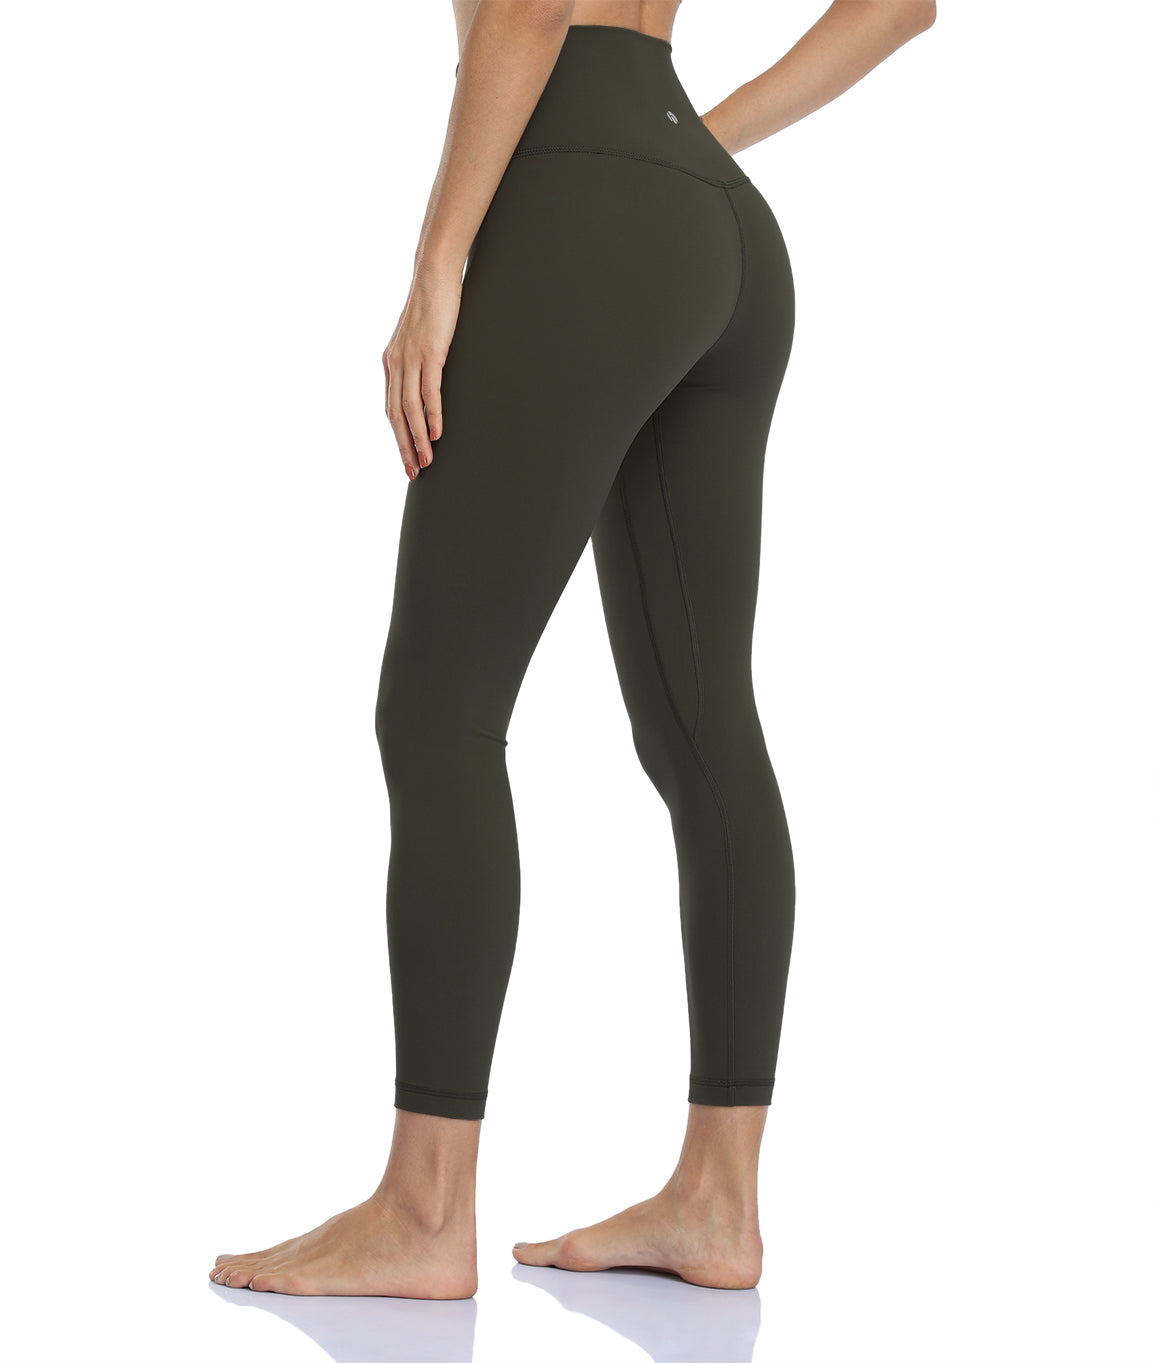  HeyNuts Workout Pro Athletic High Waisted Yoga